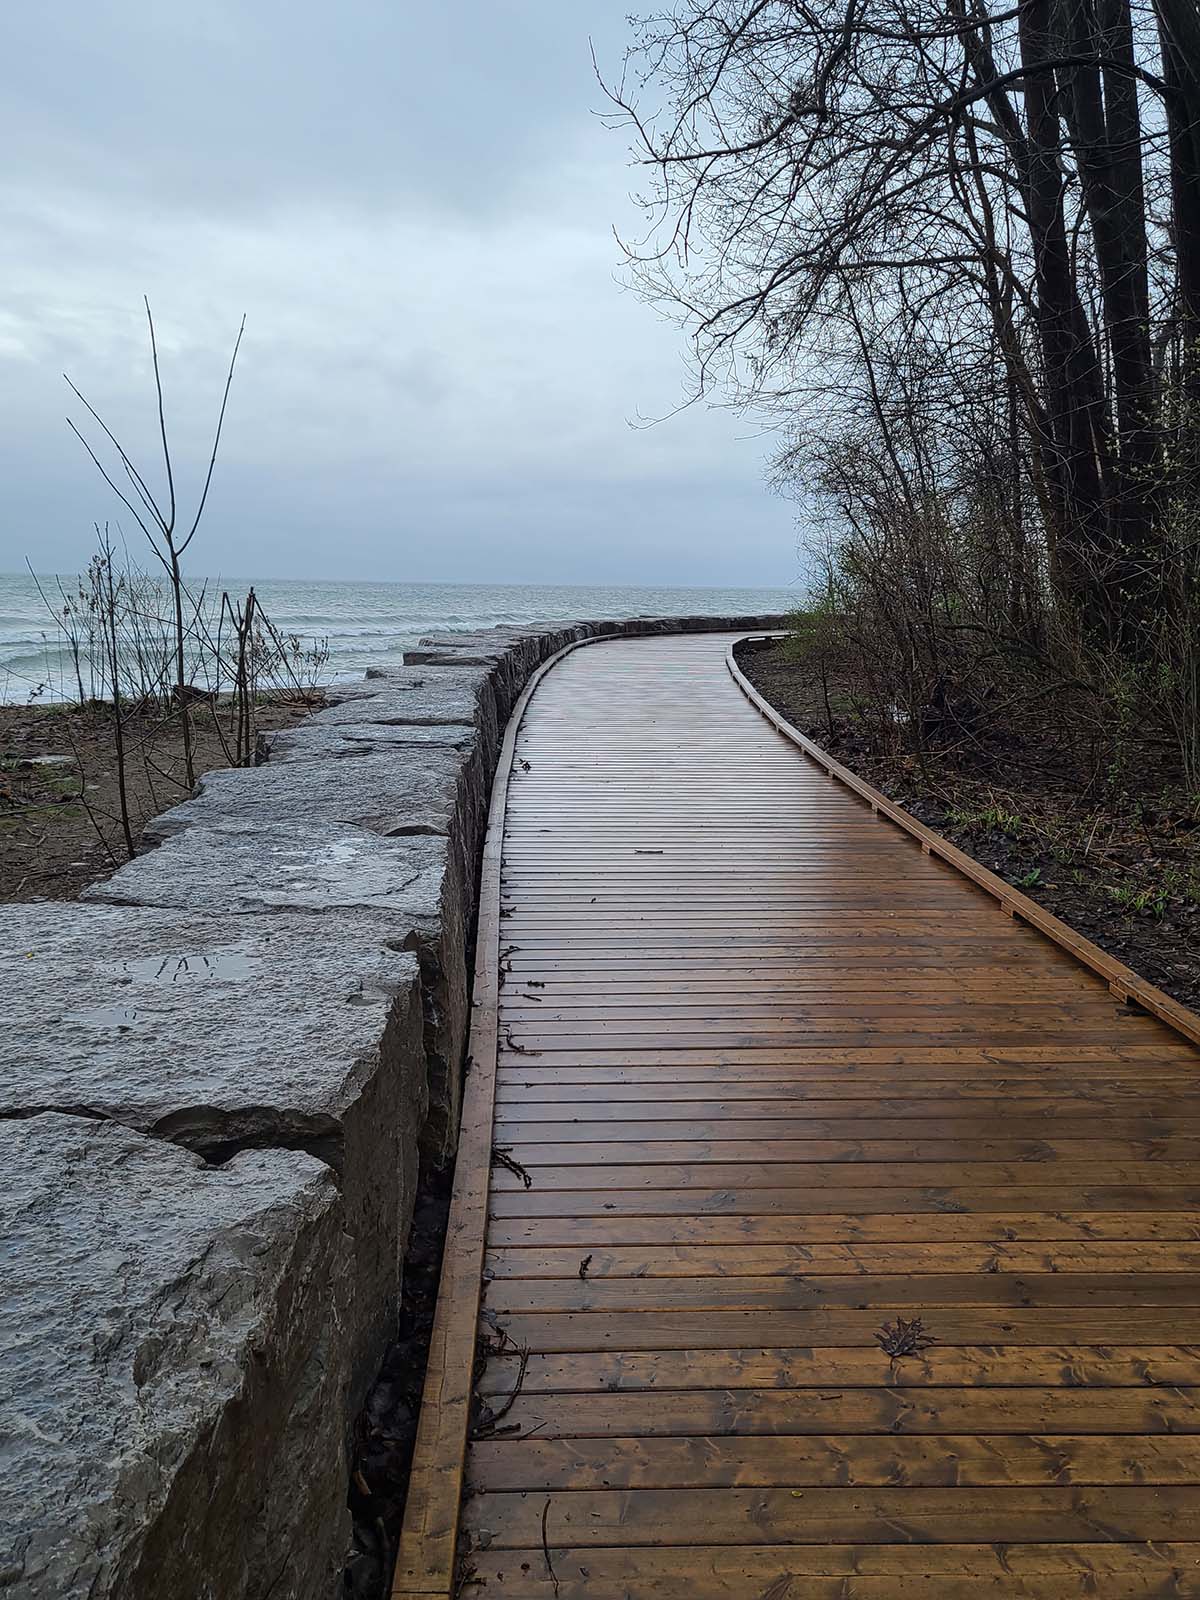 A section of boardwalk in Rattray Marsh Consveration Area, with Lake Ontario in the background.